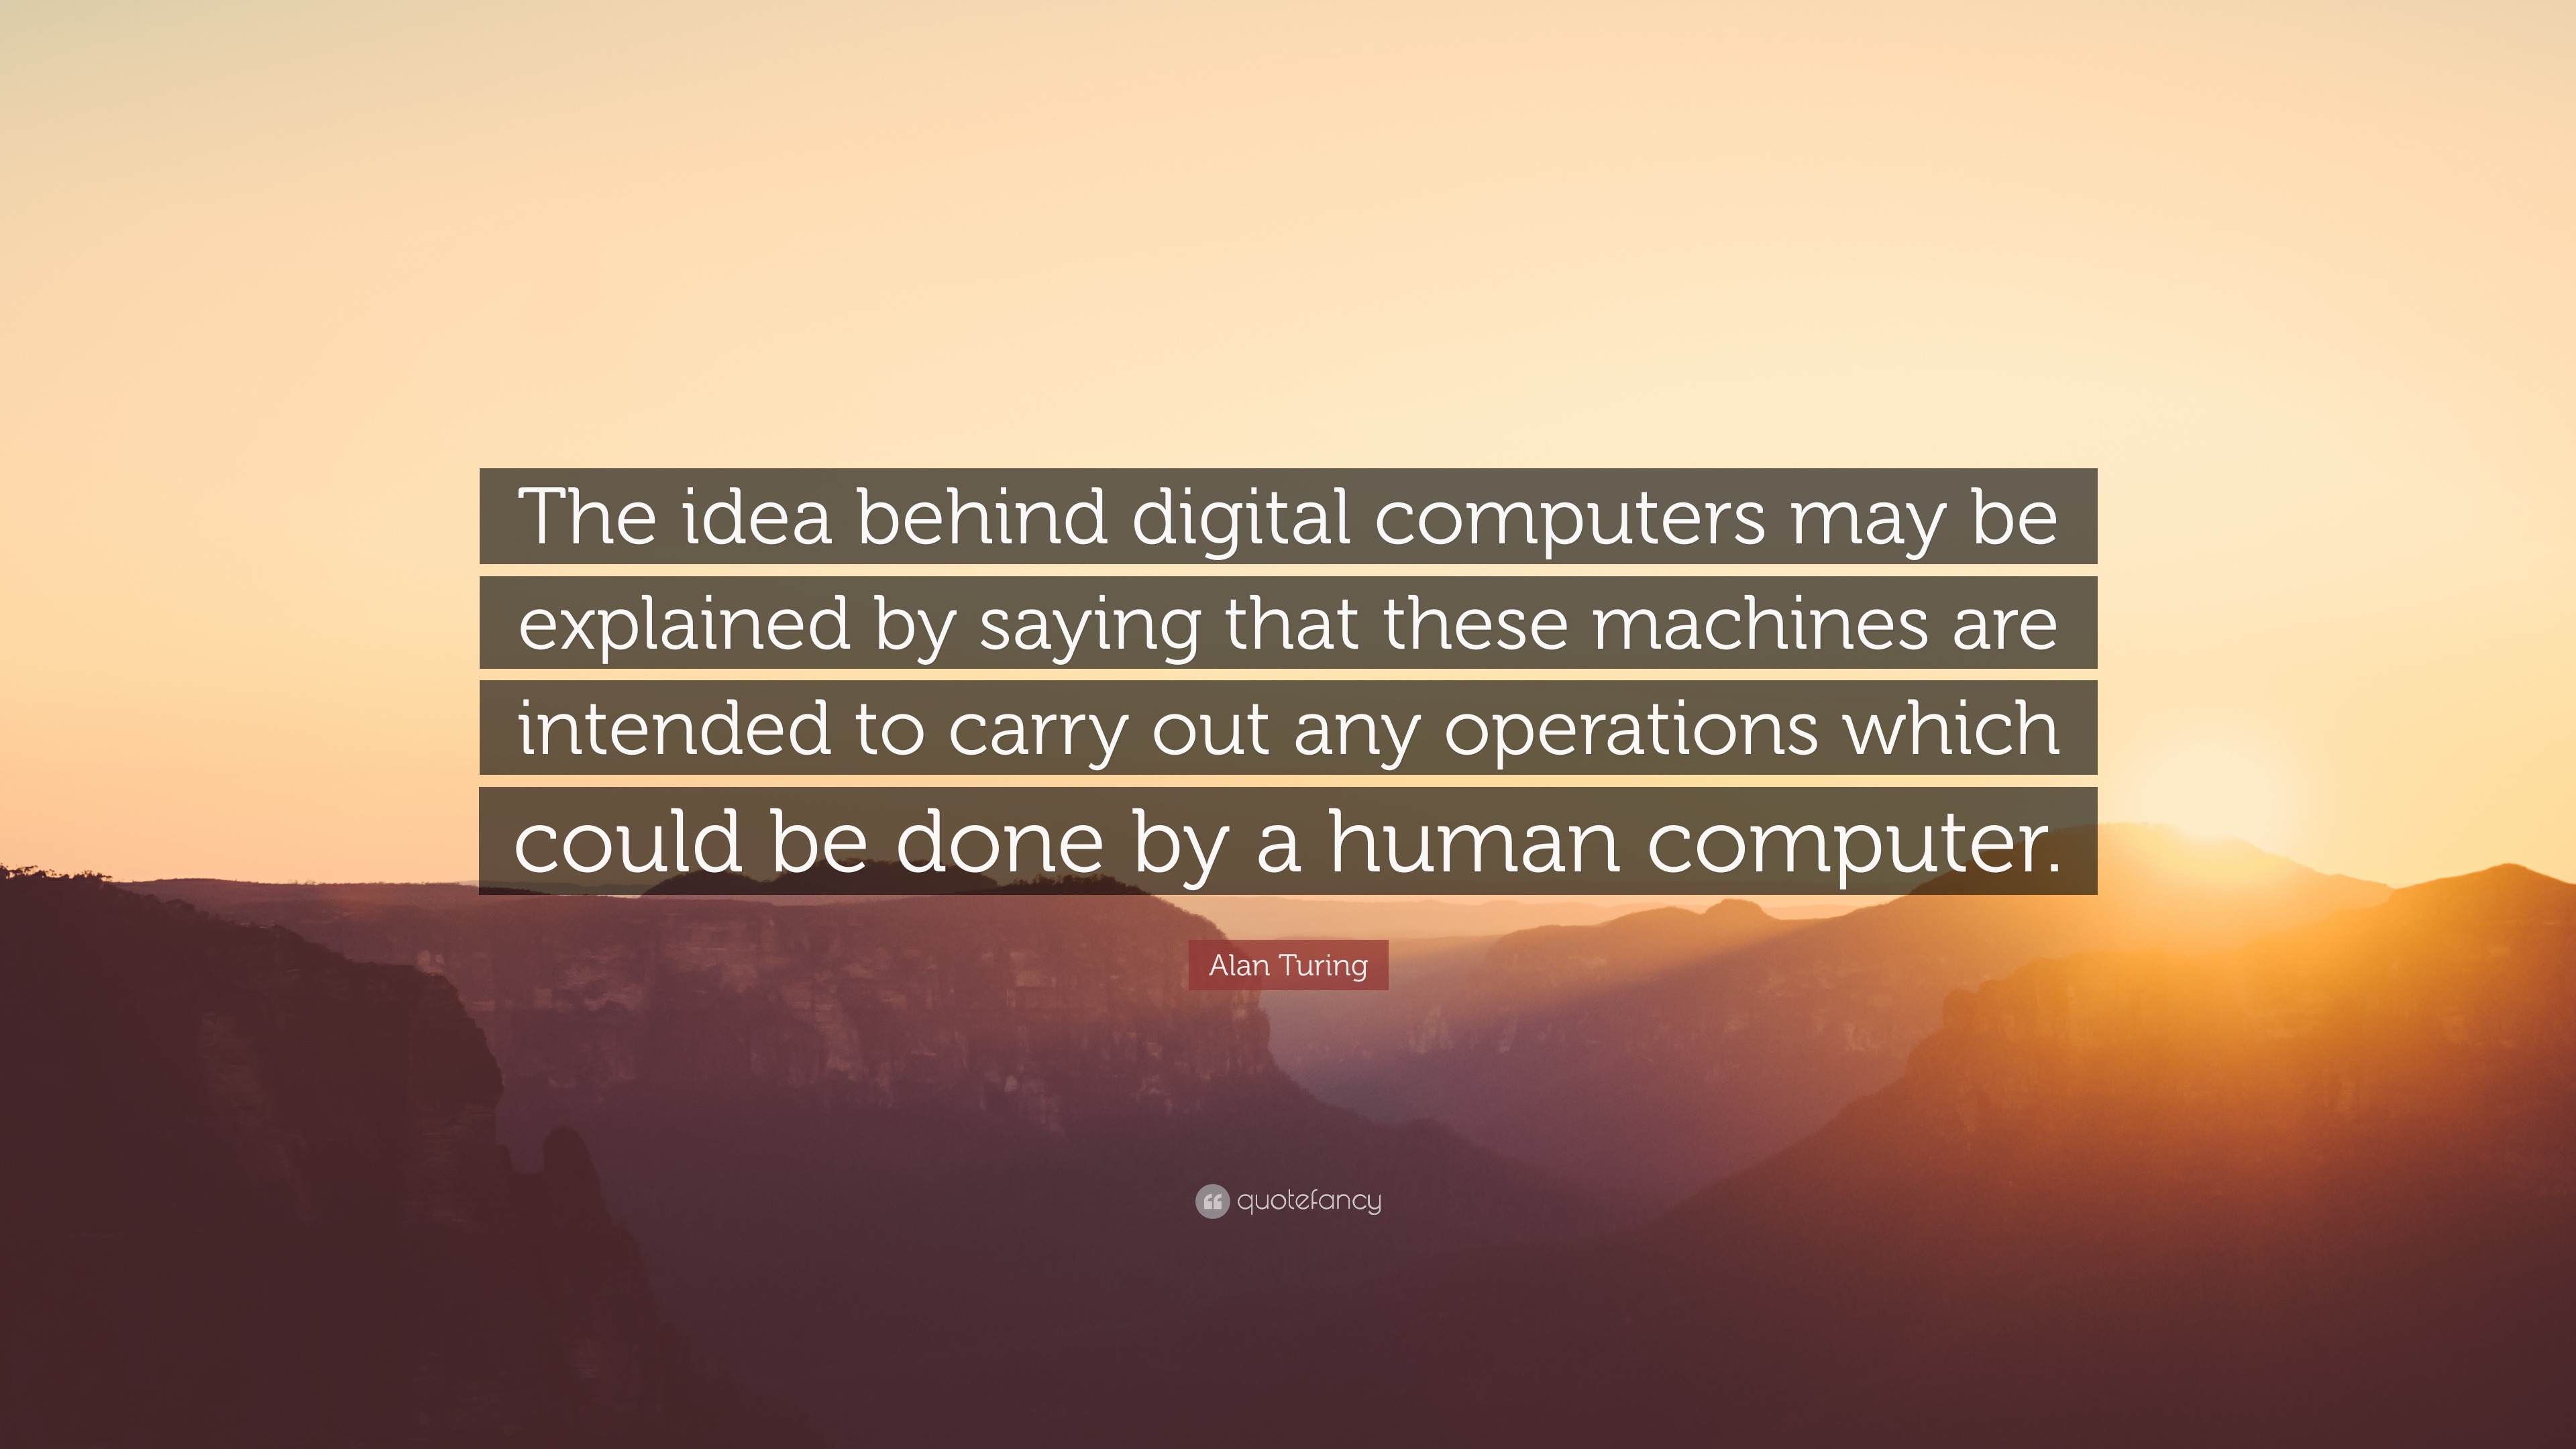 Alan Turing Quote: "The idea behind digital computers may ...